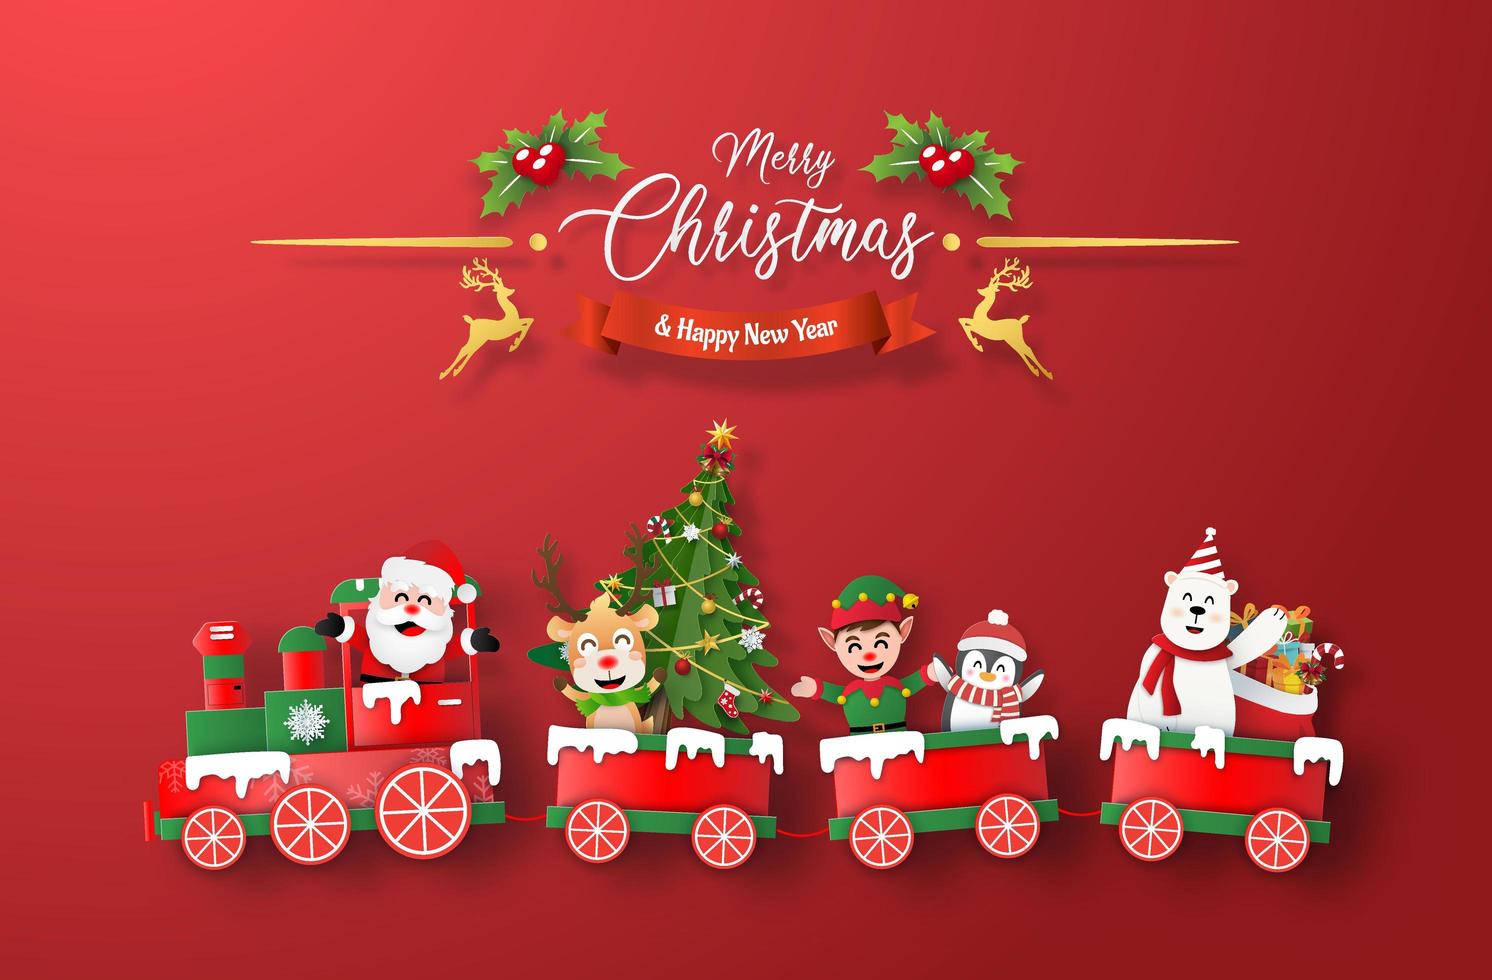 Origami paper art of Christmas train with Santa Claus and character on red background vector